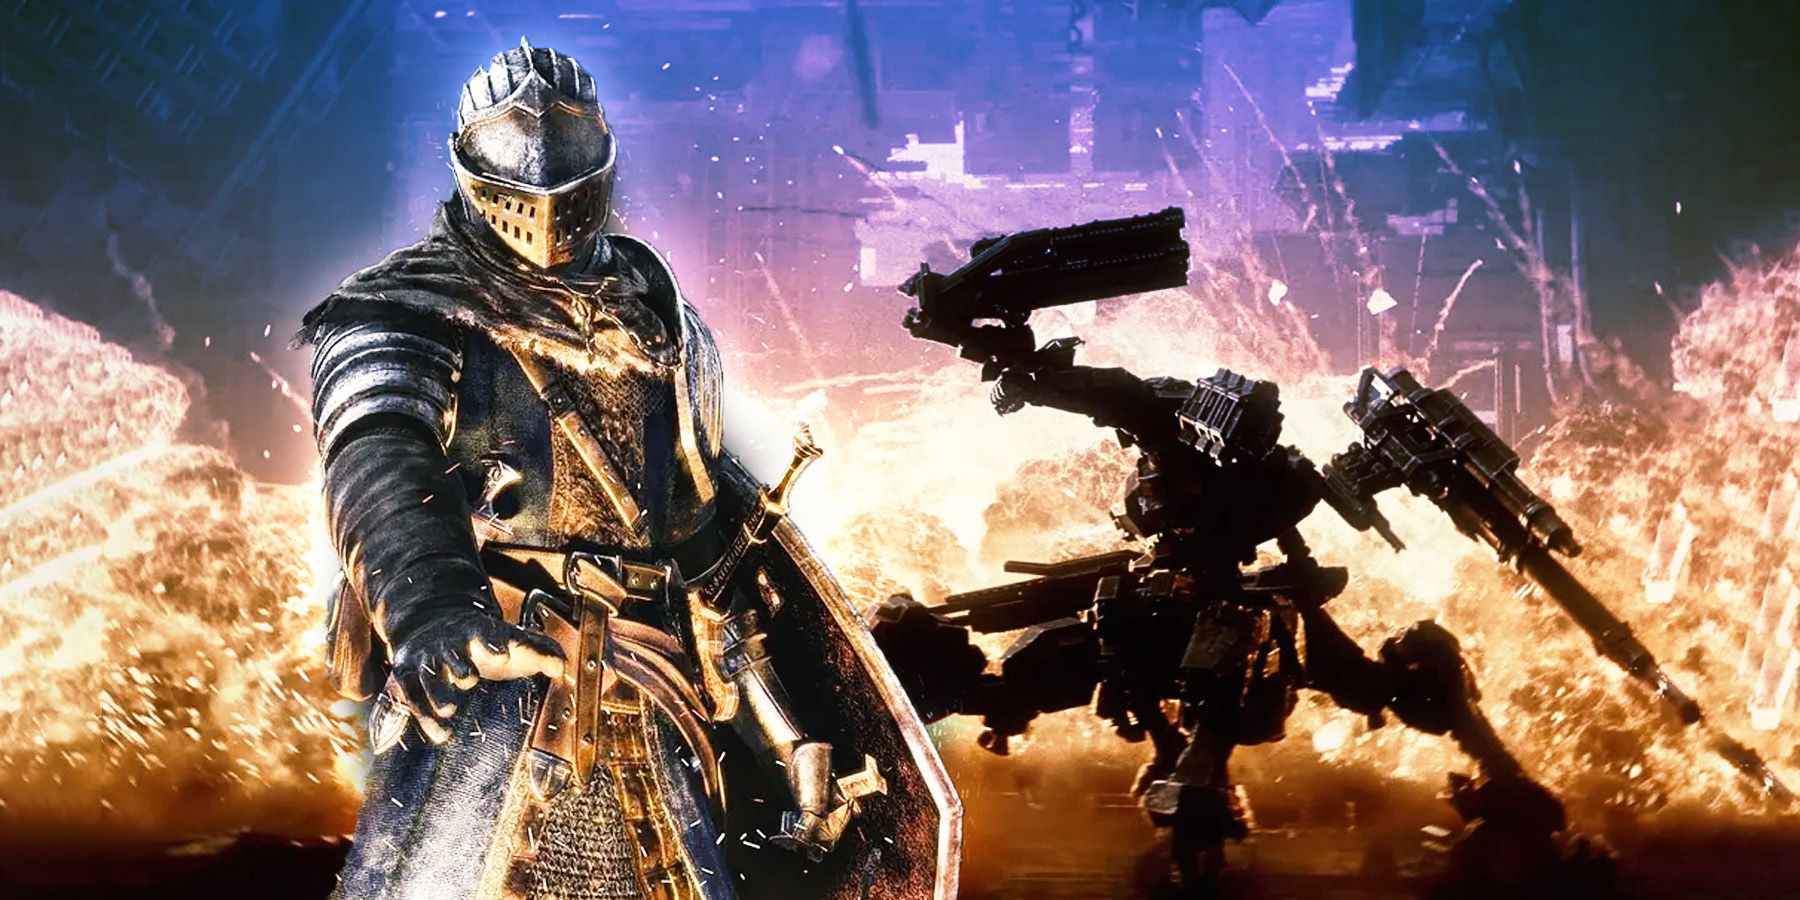 An armored knight from the Dark Souls series superimposed on an image of Armored Core mech action.